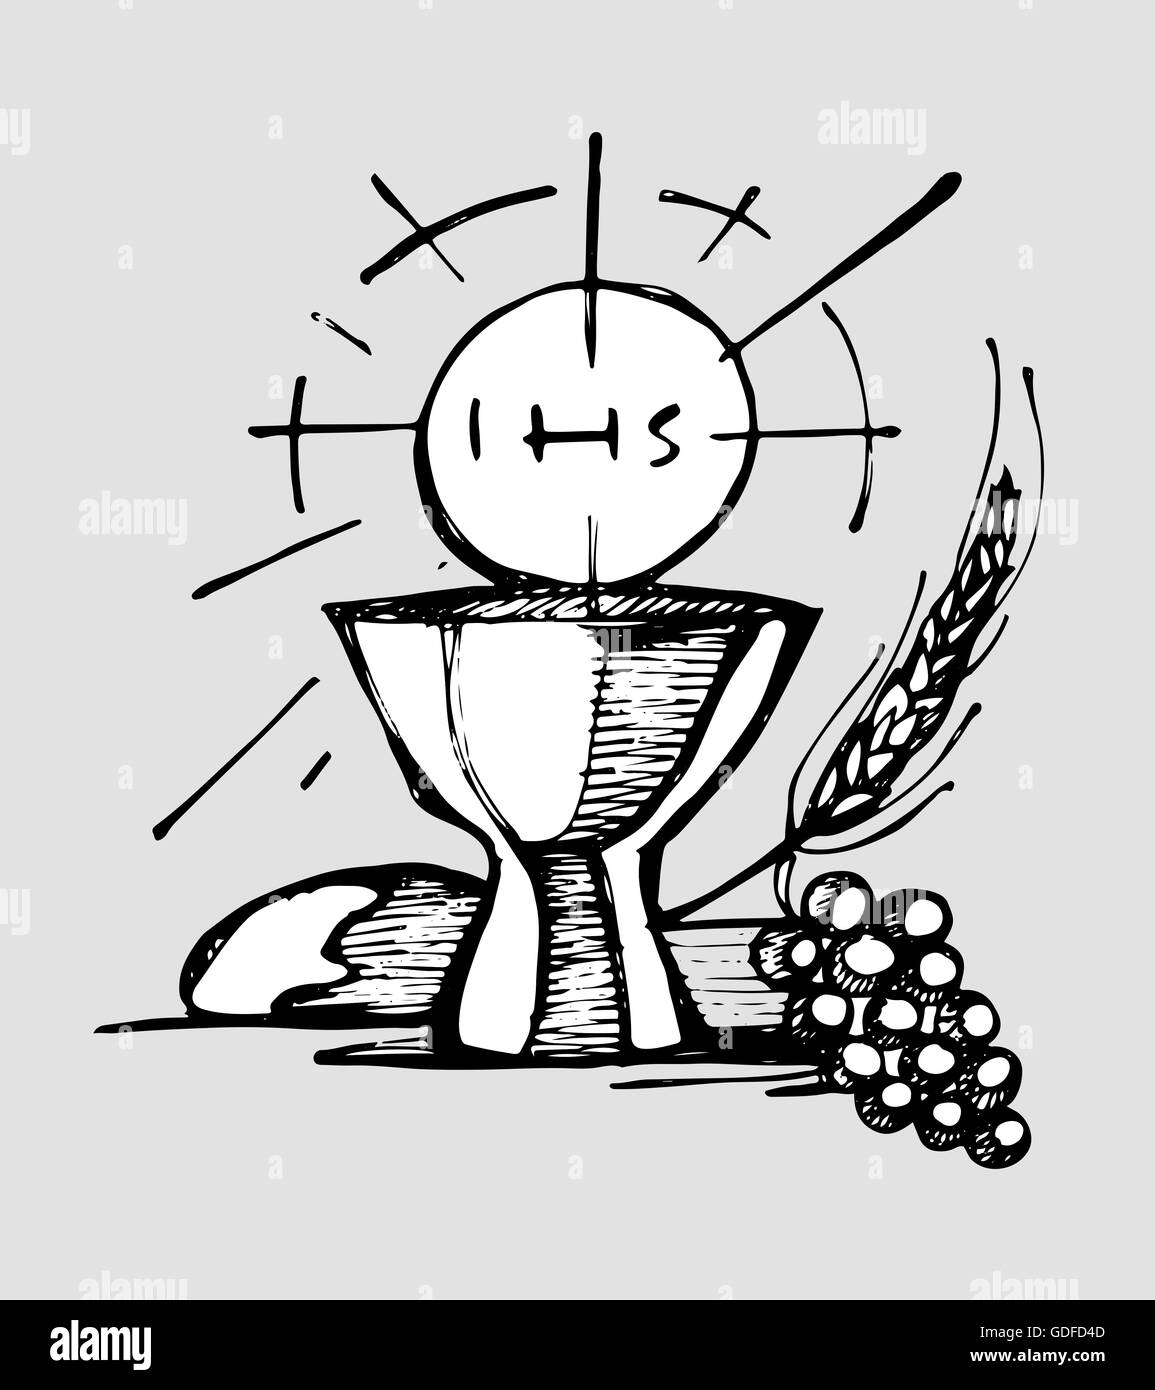 Hand drawn illustration or drawing of a Cup, a Host, bread, grapes and wheat, representing Eucharist Catholic Sacrament Stock Photo